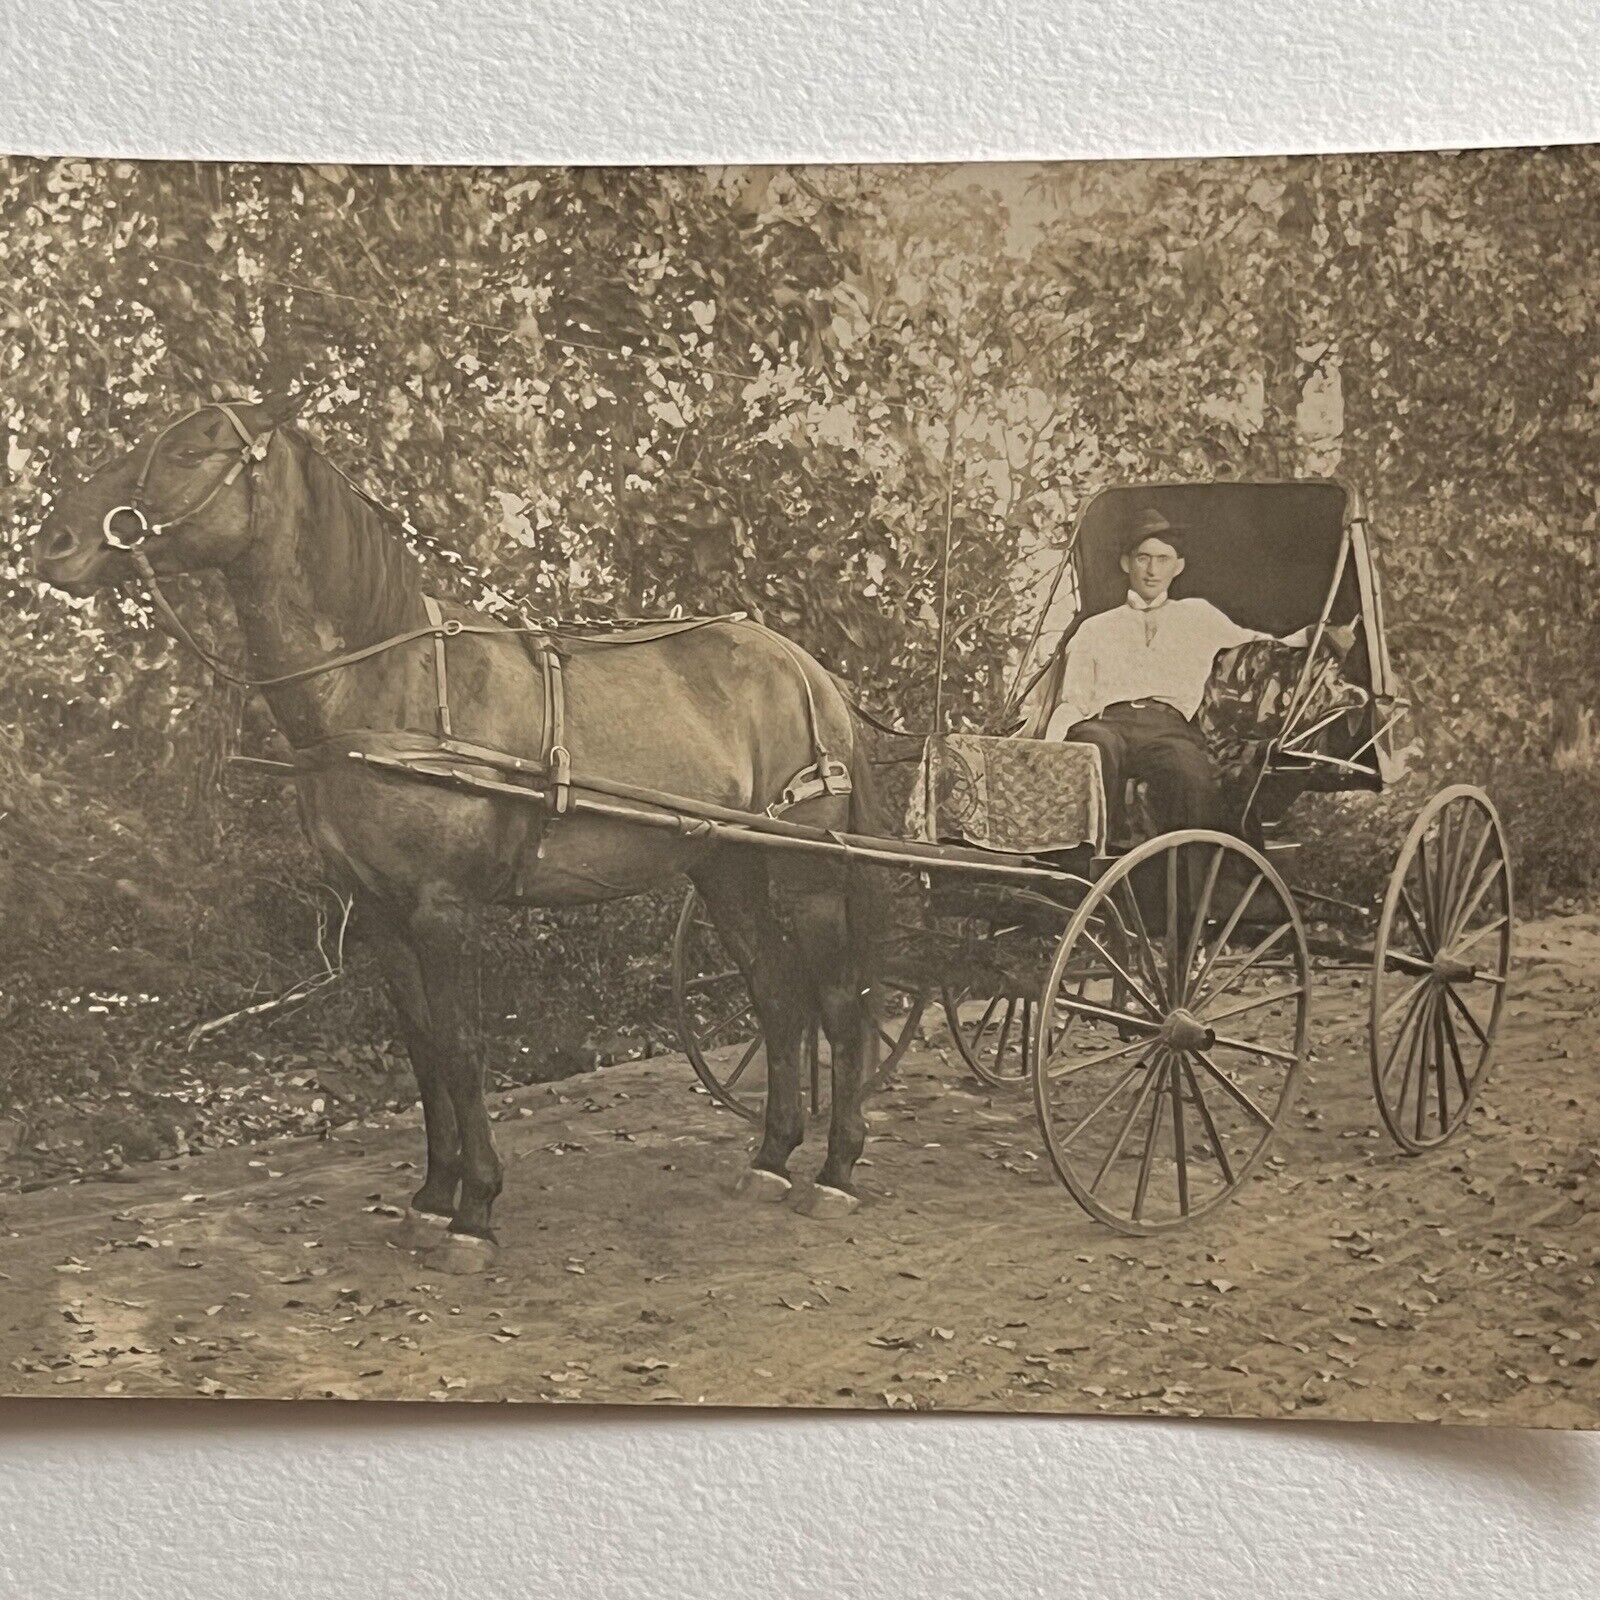 Antique RPPC Real Photograph Postcard Handsome Man Horse Drawn Wagon Buggy